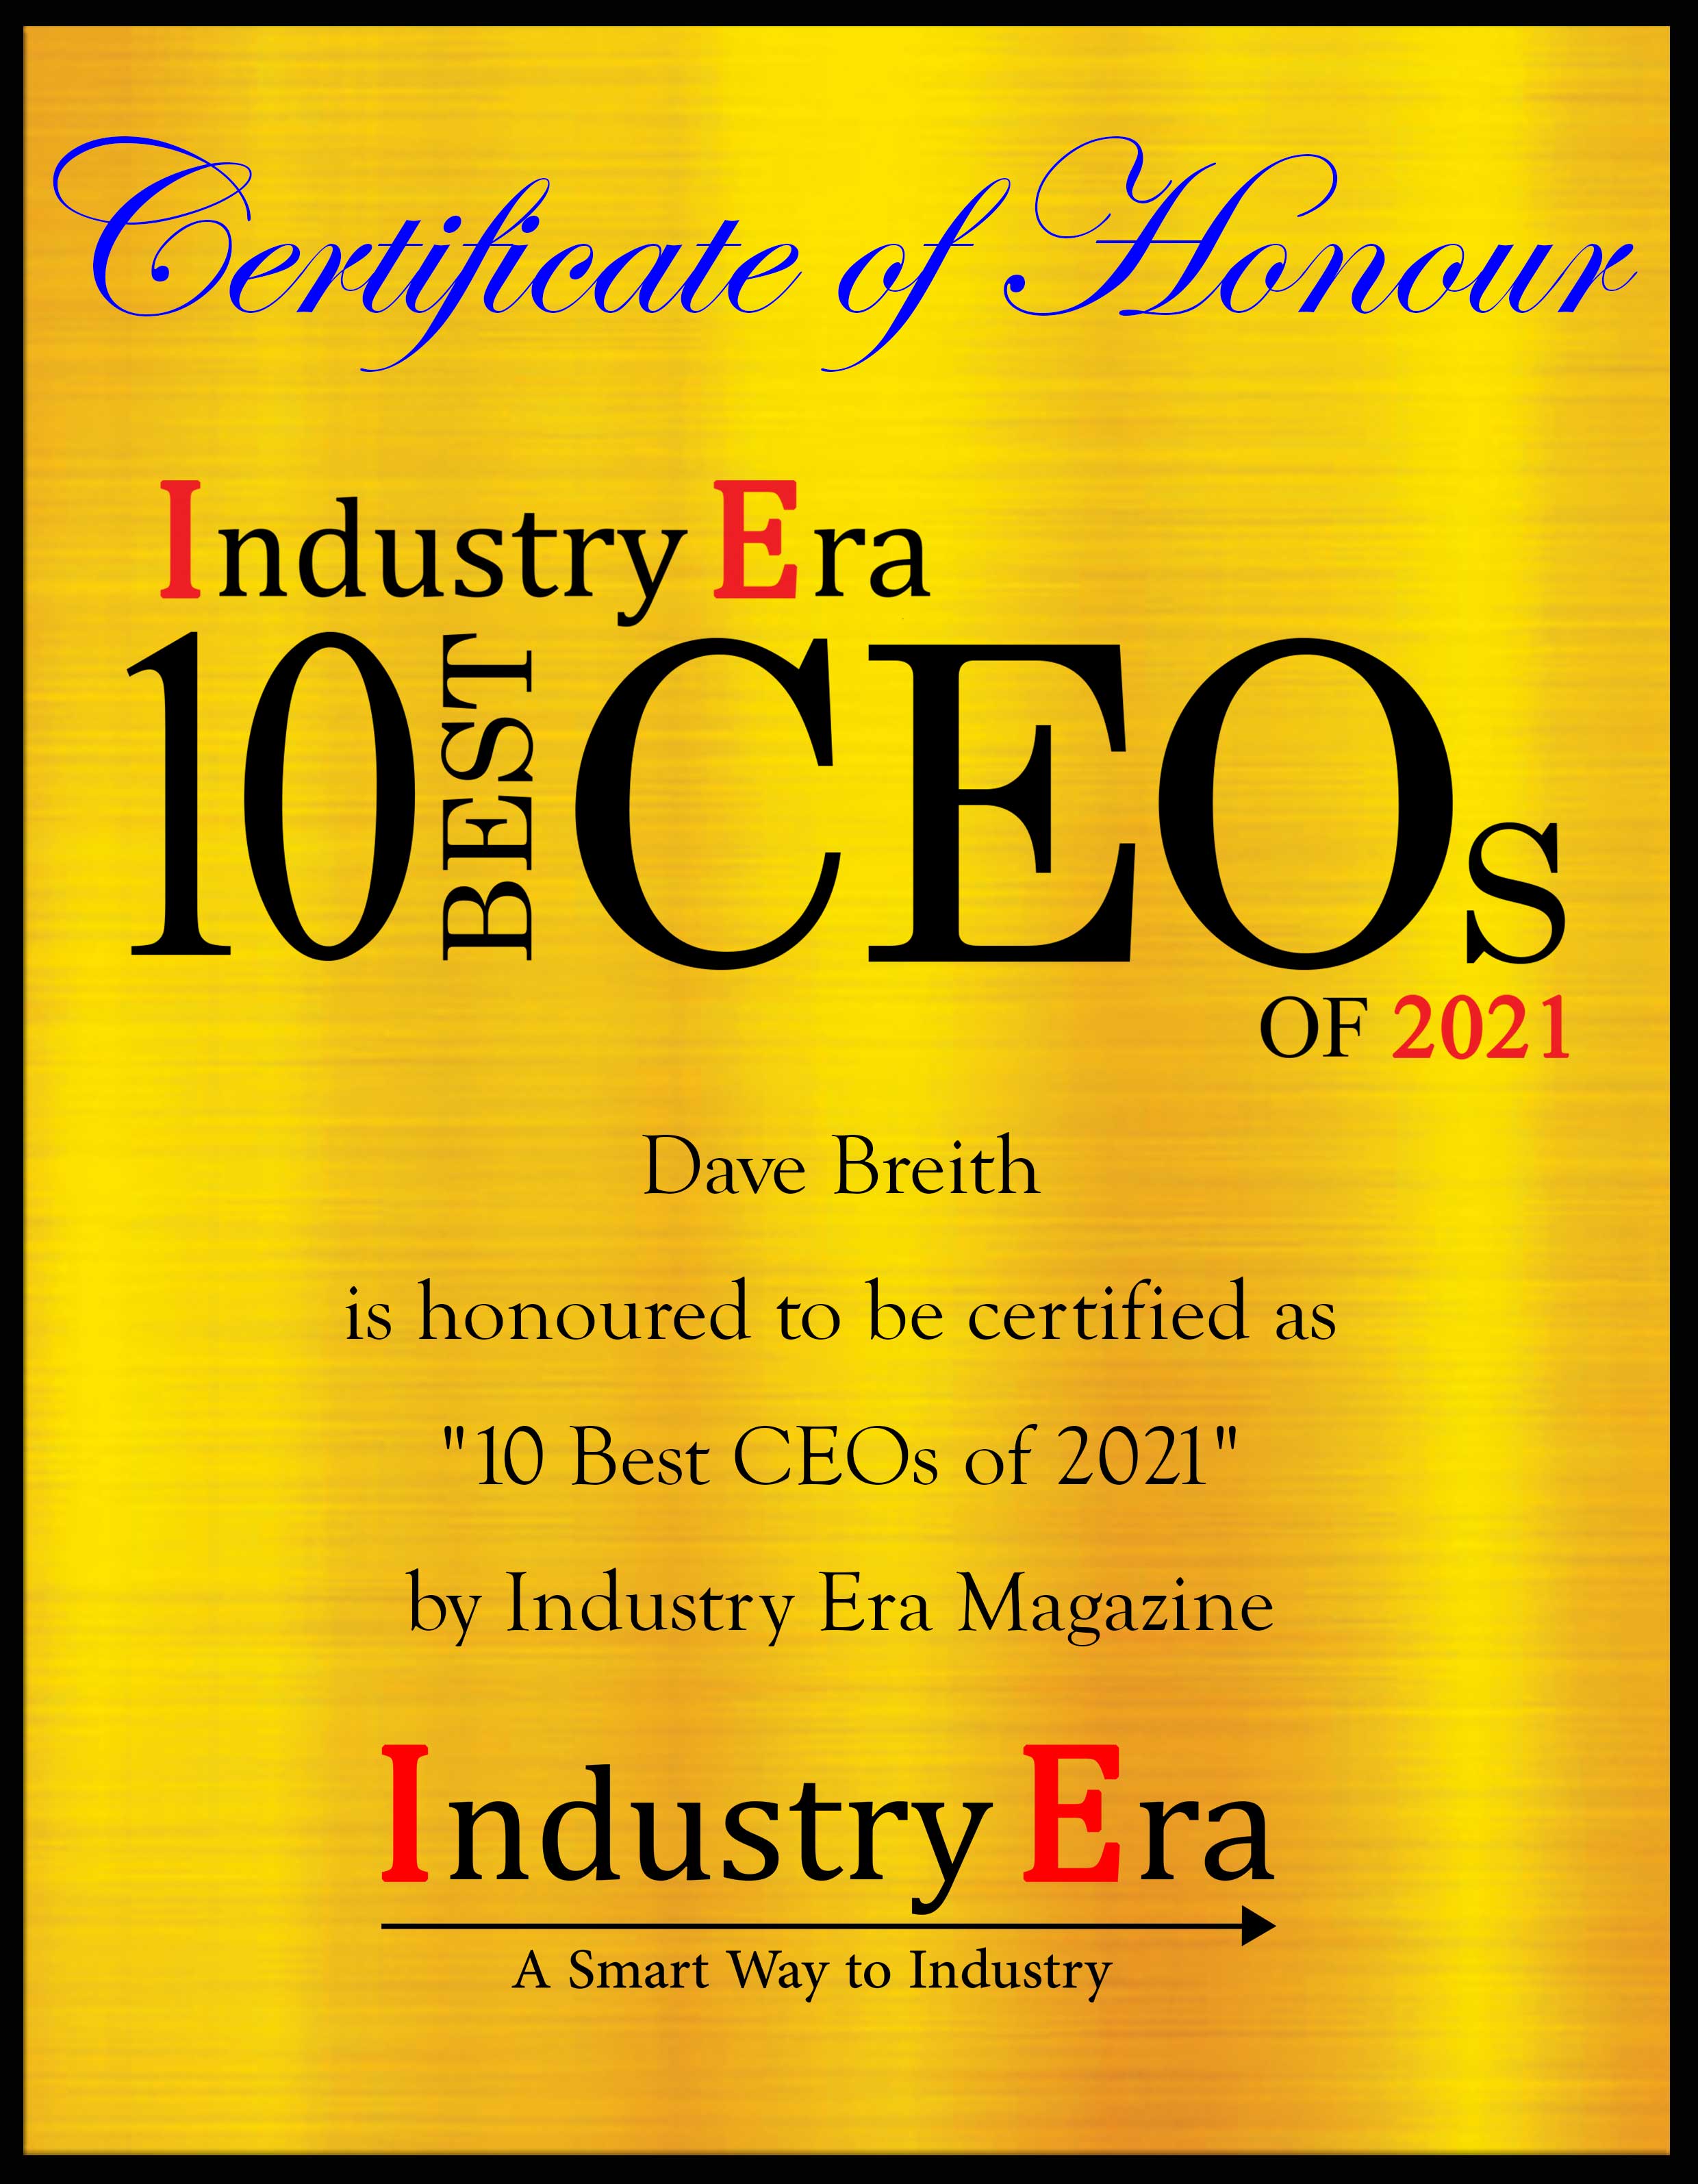 Dave Breith, Group CEO of Firexo Certificate